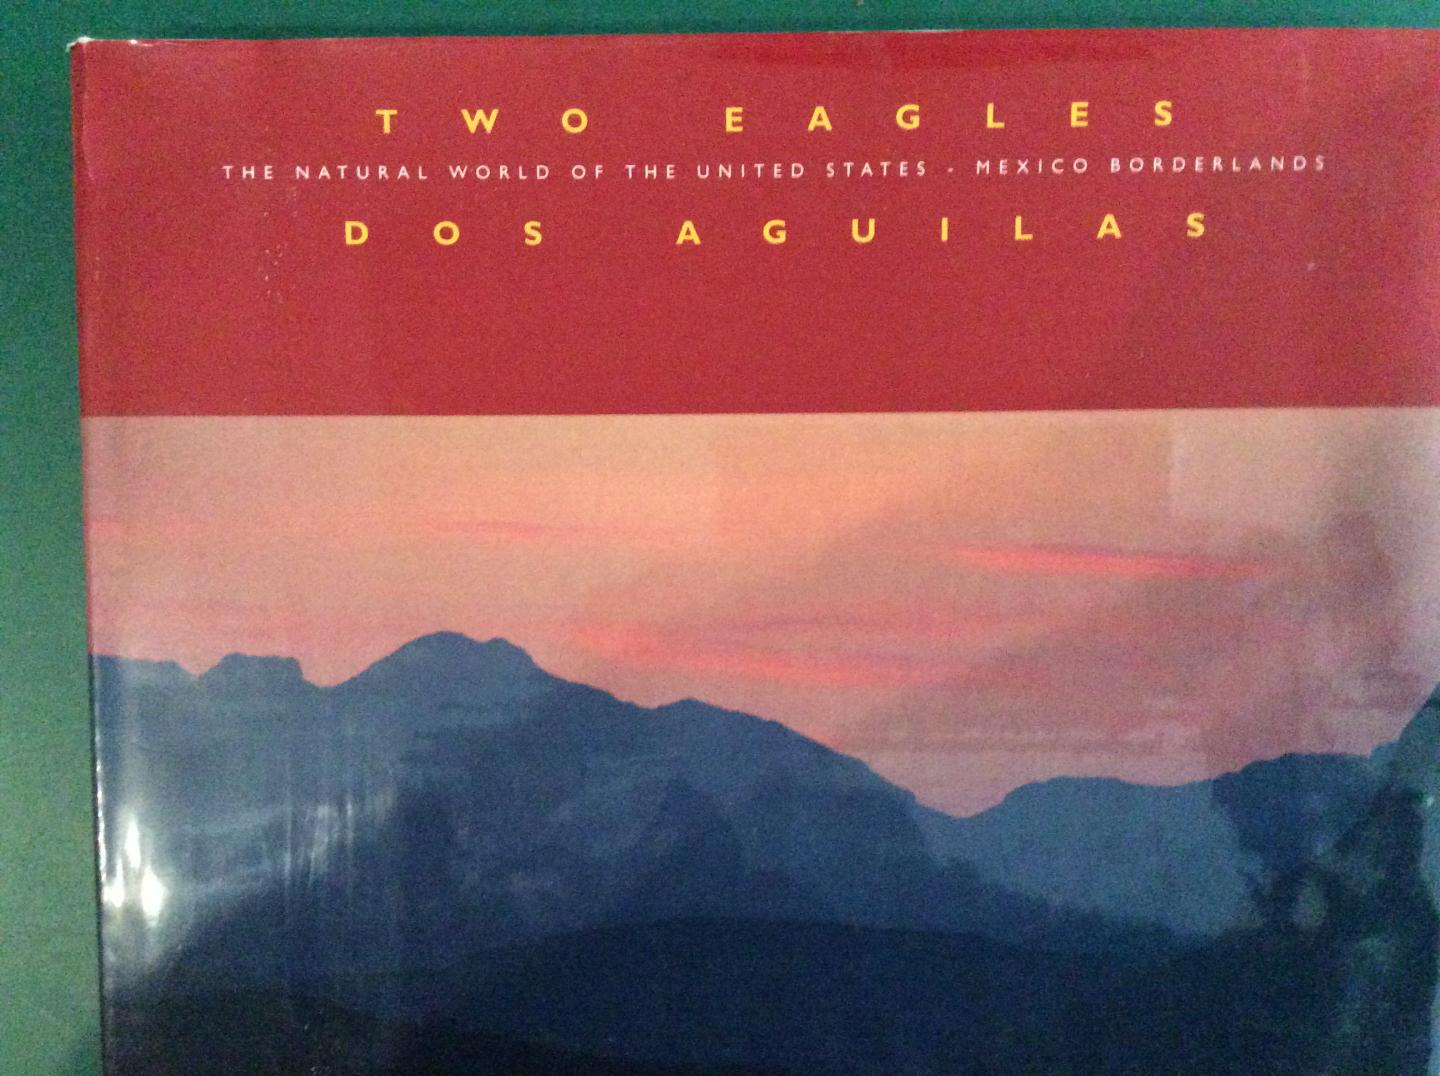 Blake, Tupper Ansell - Two Eagles/Dos Aguilas - The Natural World of the United States-Mexico Borderlands